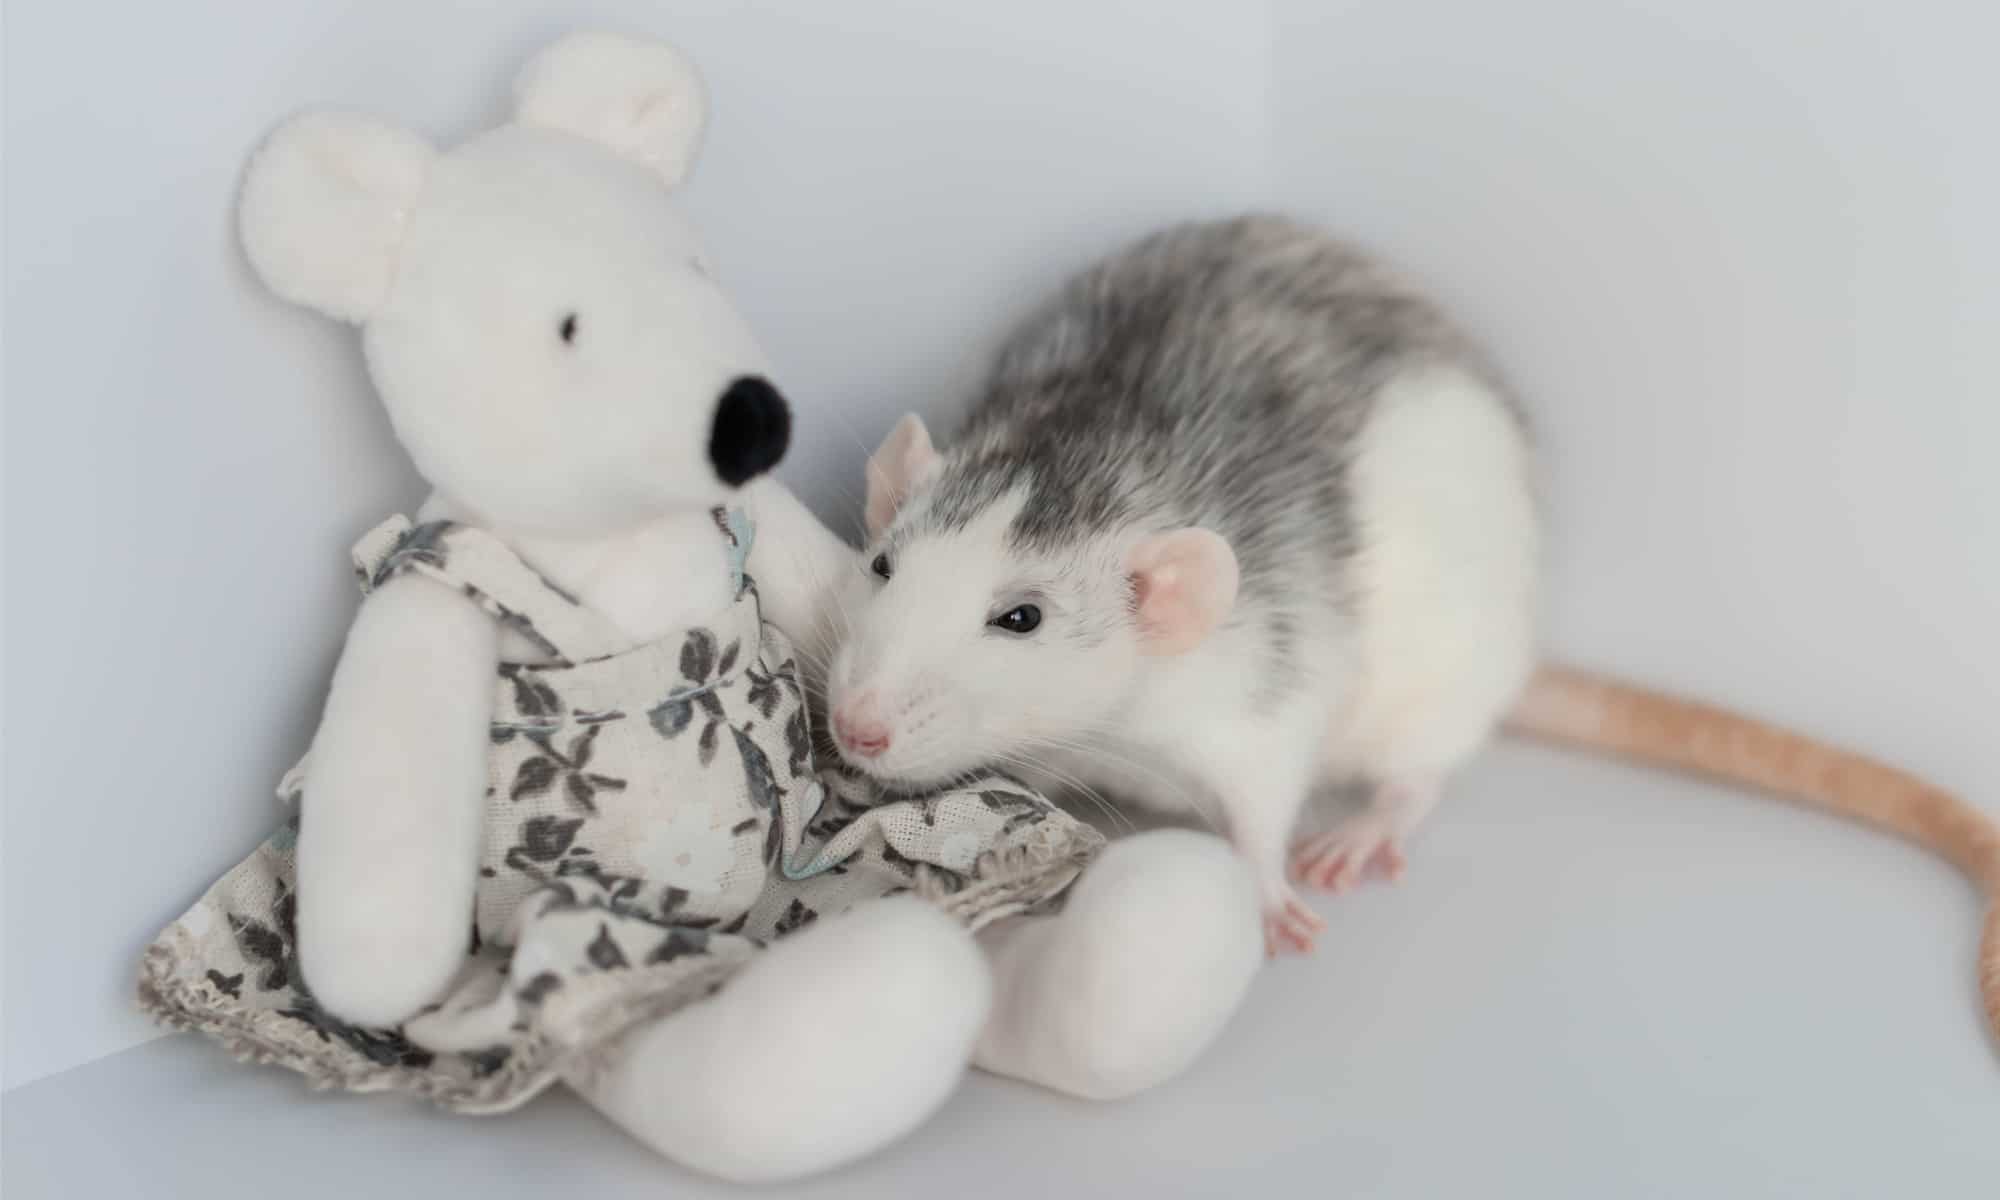 Grey and white dumbo rat with a stuffed rat doll in a dress